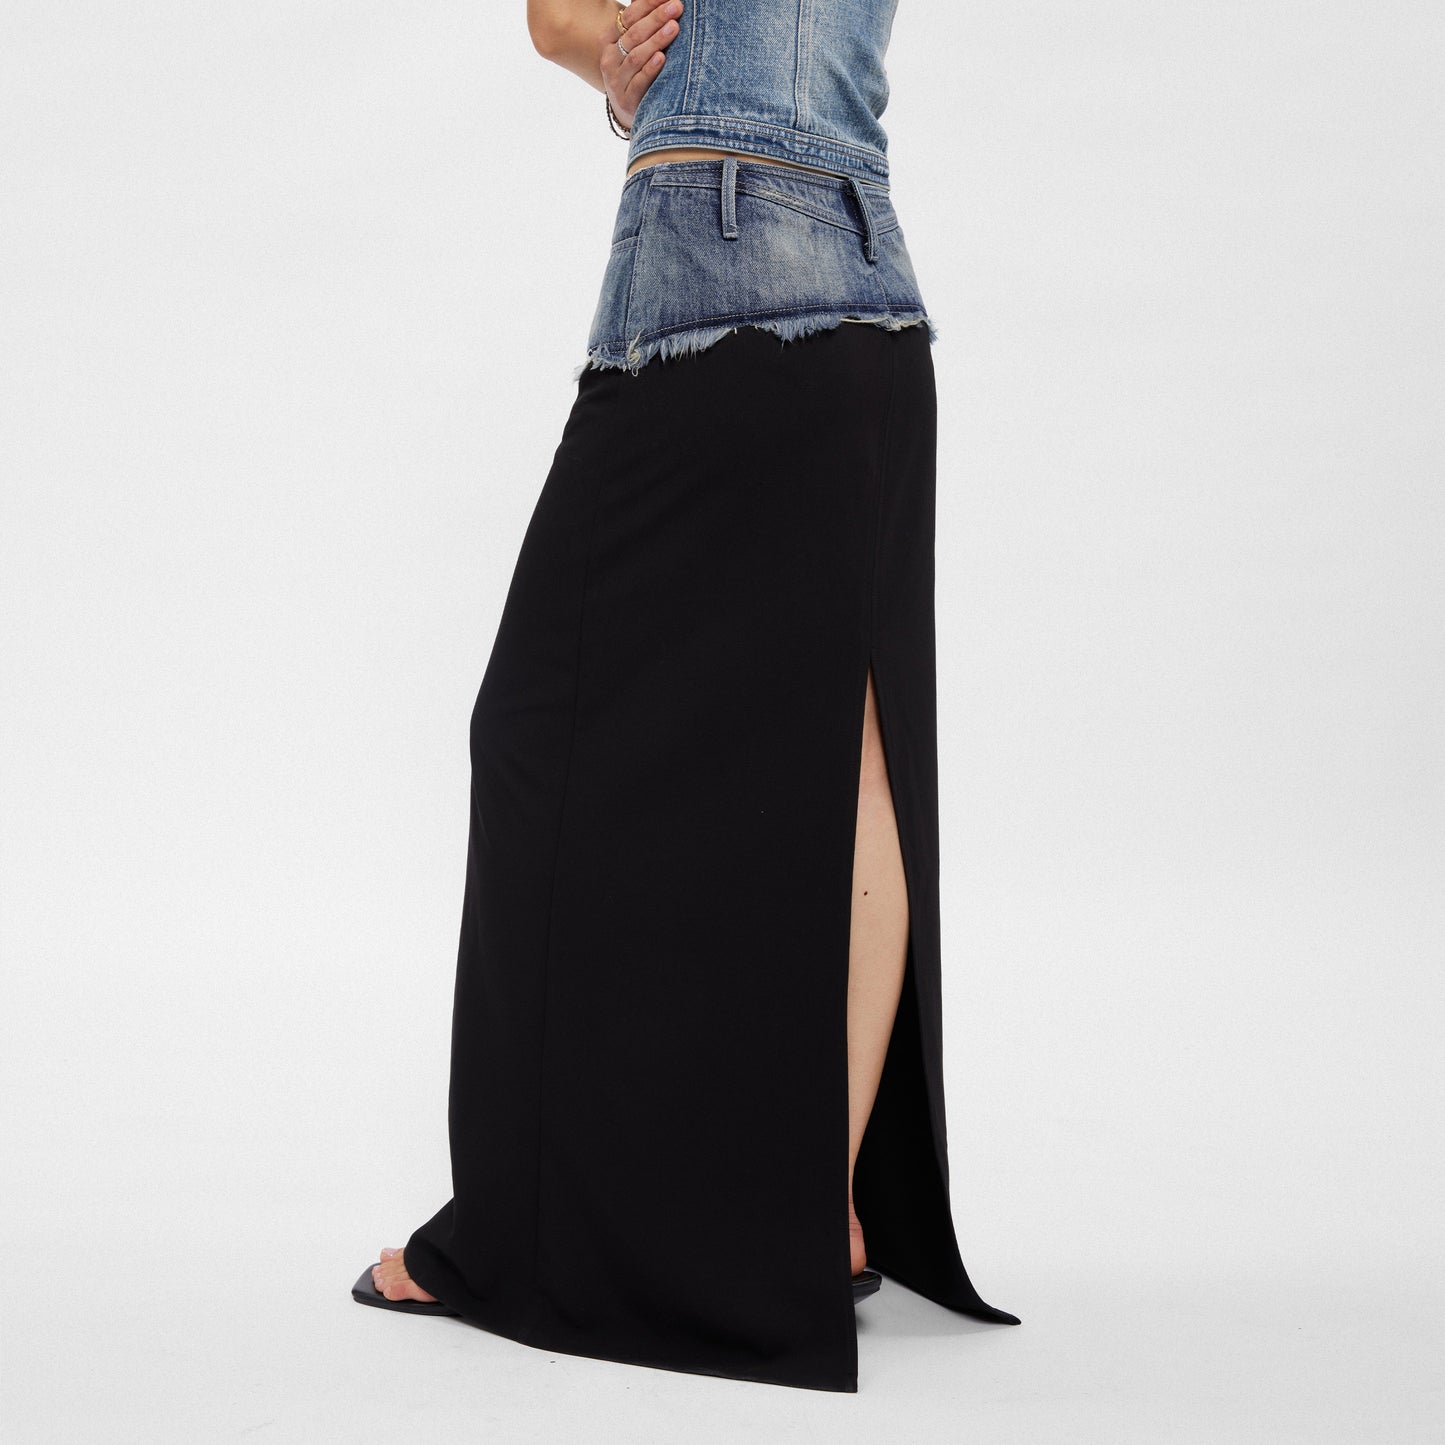 The Two Tone High-Slit Maxi Skirt